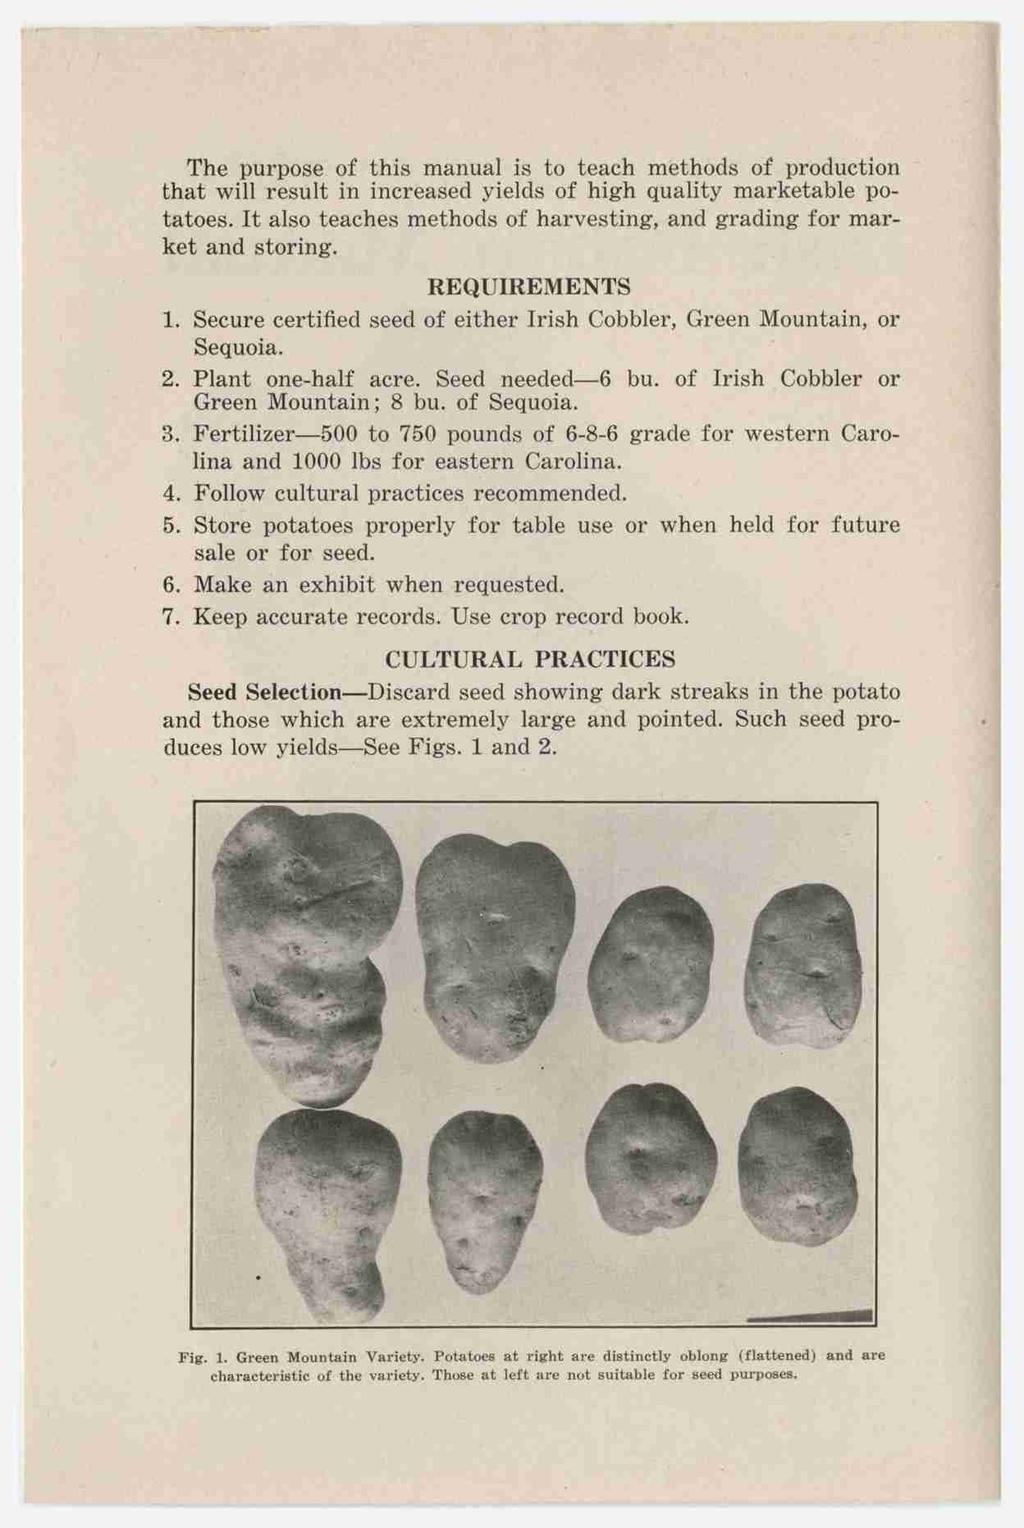 ' The purpose of this manual is to teach methods of production that will result in increased yields of high quality marketable potatoes.